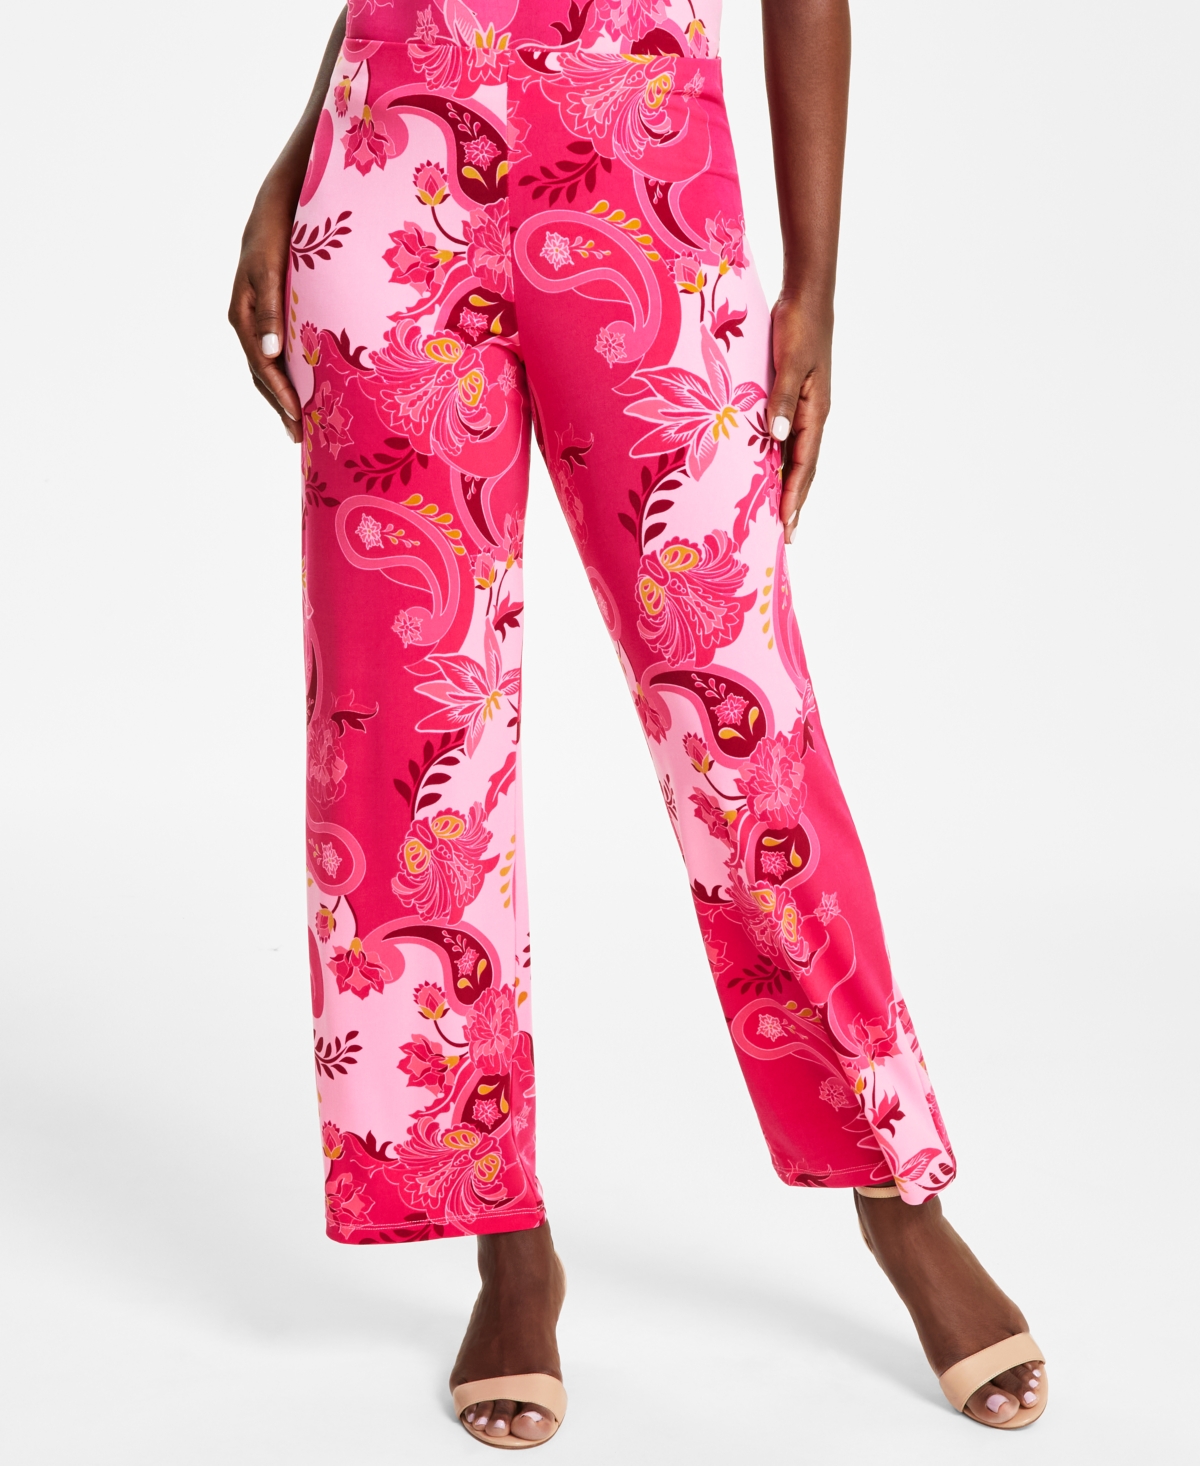 Women's Printed Pull On Knit Pants, Created for Macy's - Claret Rose Combo